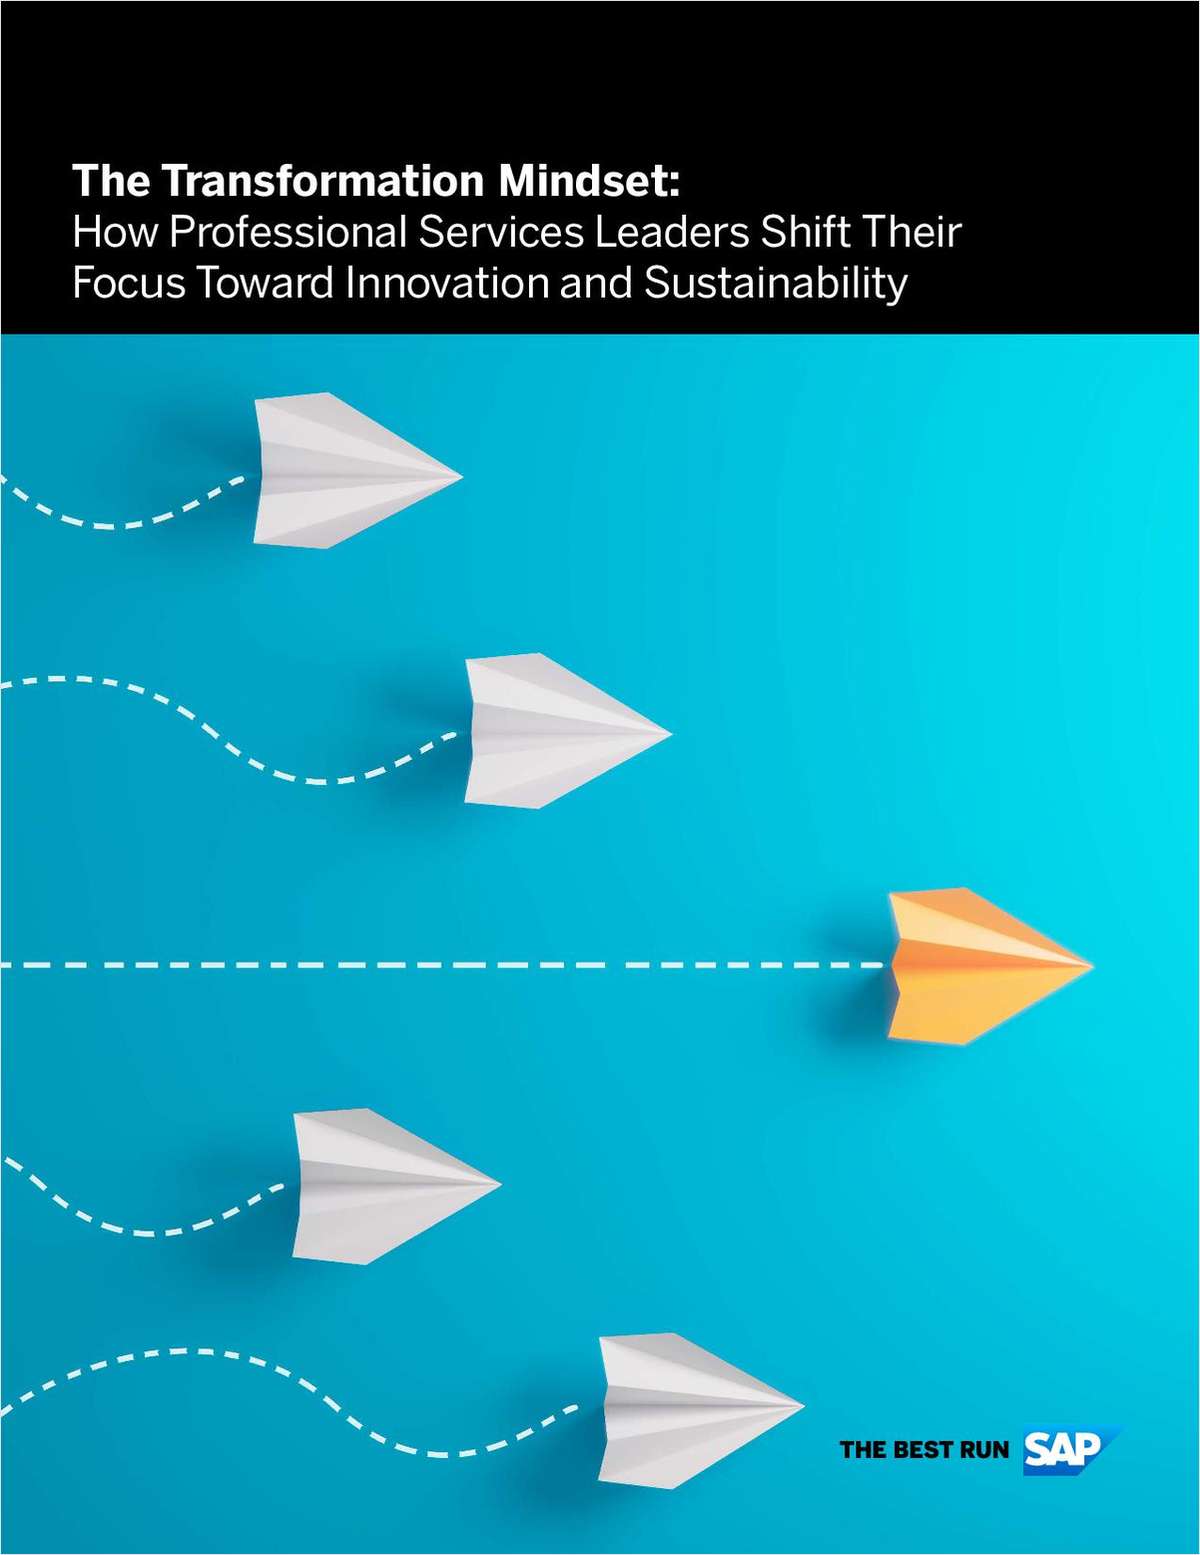 The Transformation Mindset: How Professional Services Leaders Shift Their Focus Toward Innovation and Sustainability